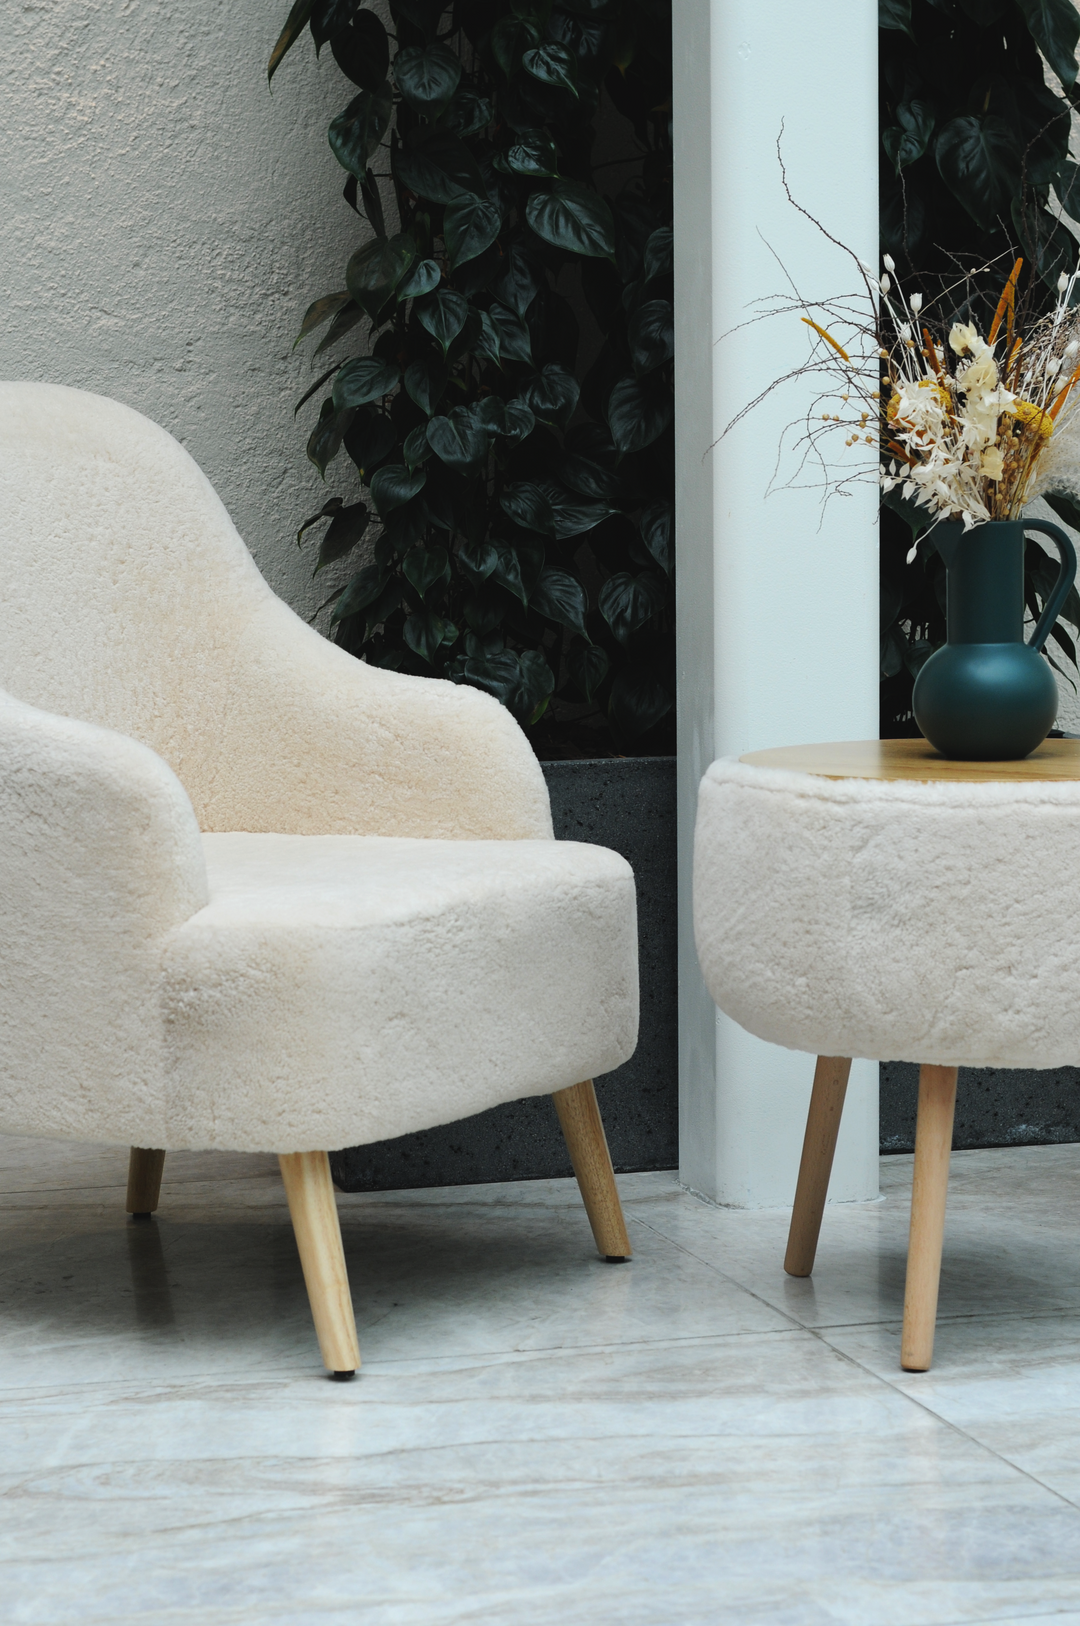 Levinsky Chair No. 2 - Curly Lamb - Accesories - Beige